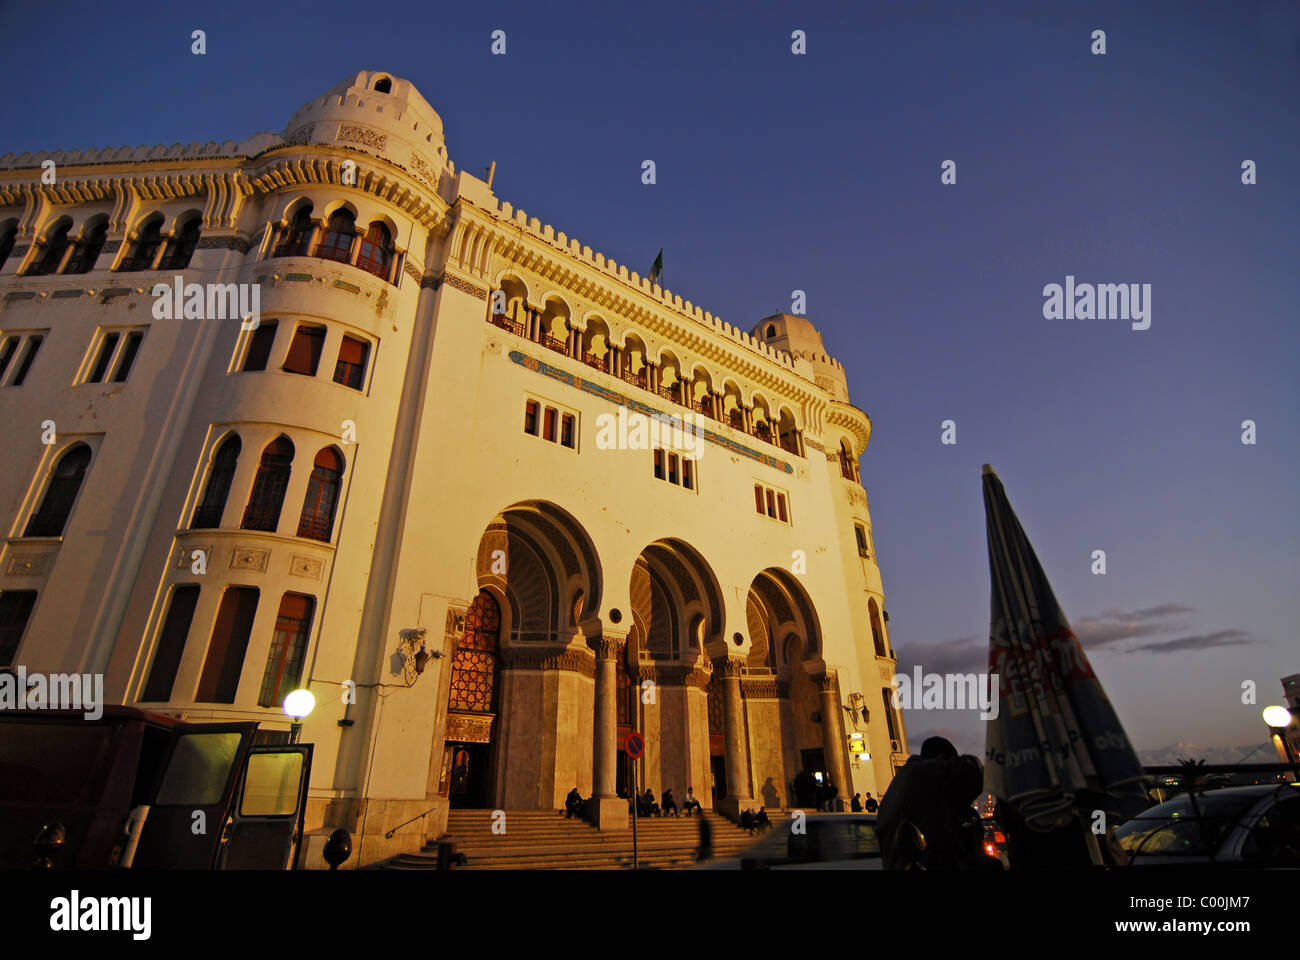 Algeria, Alger, low angle view of people by post office building against sky at dusk Stock Photo